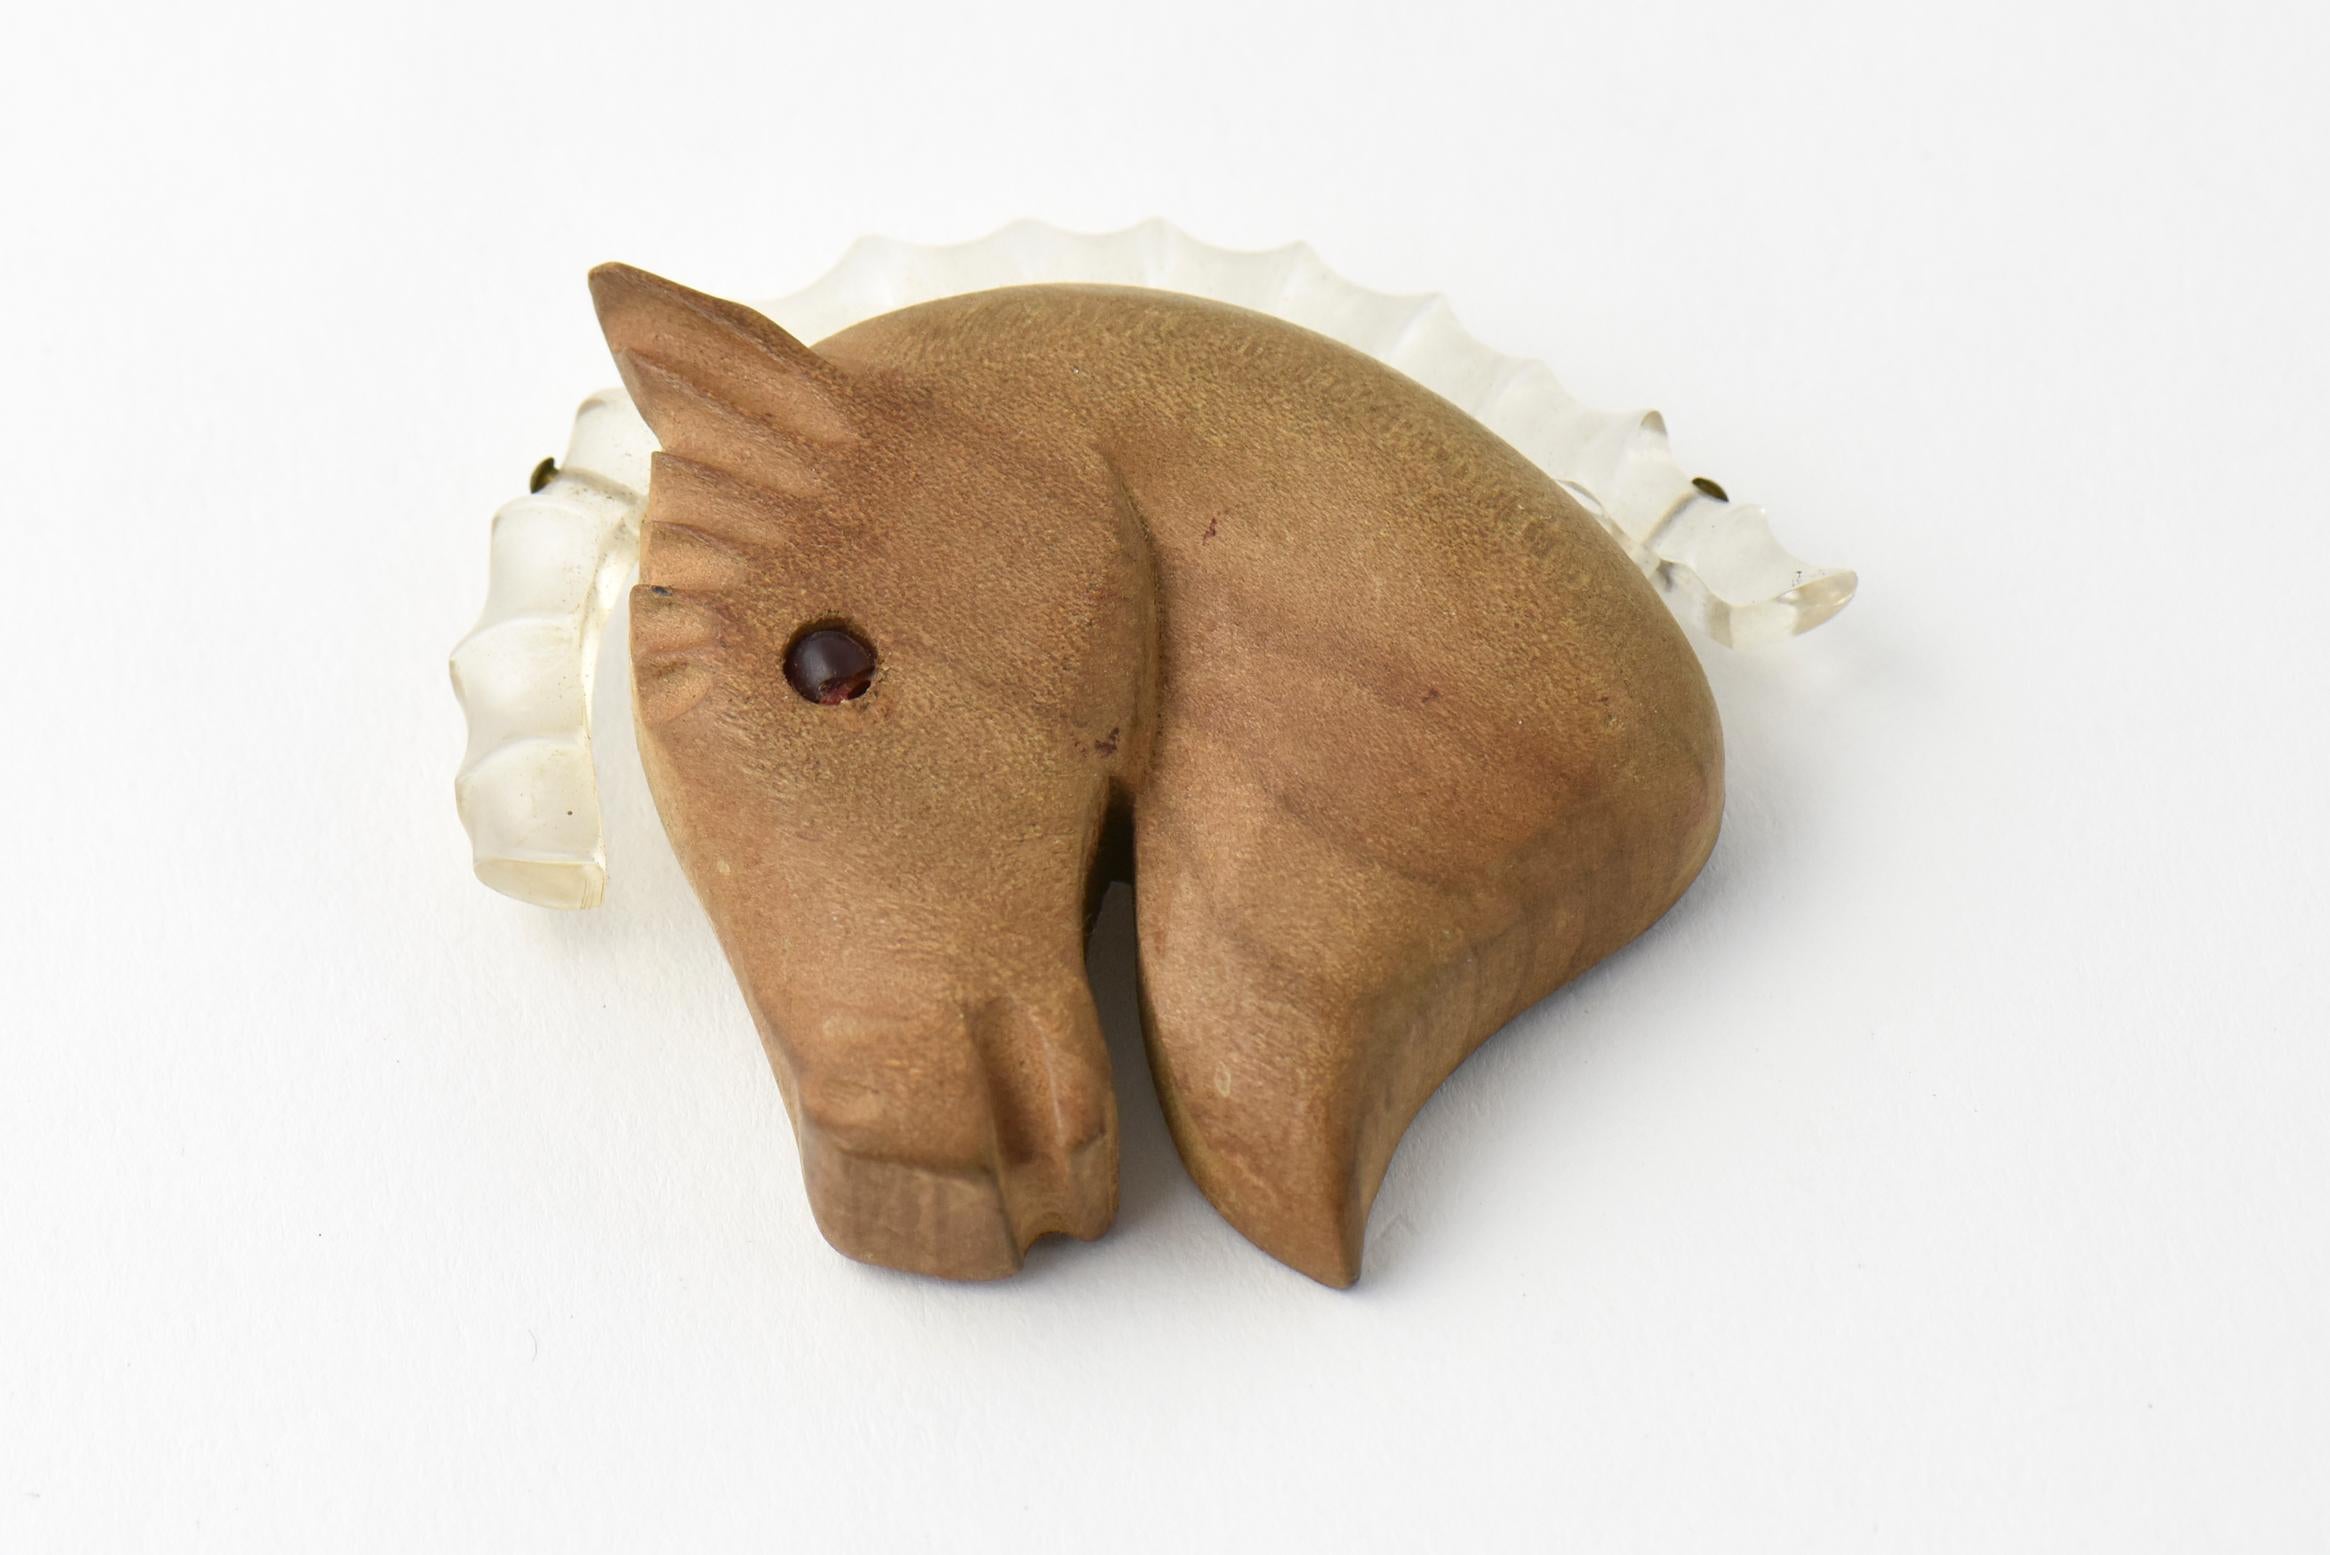 Fabulous Hand Carved Wood and Lucite Brooch. The horse's head is carved wood with a red Lucite eye and clear Lucite Mane. Similar novelty pins can be found in 